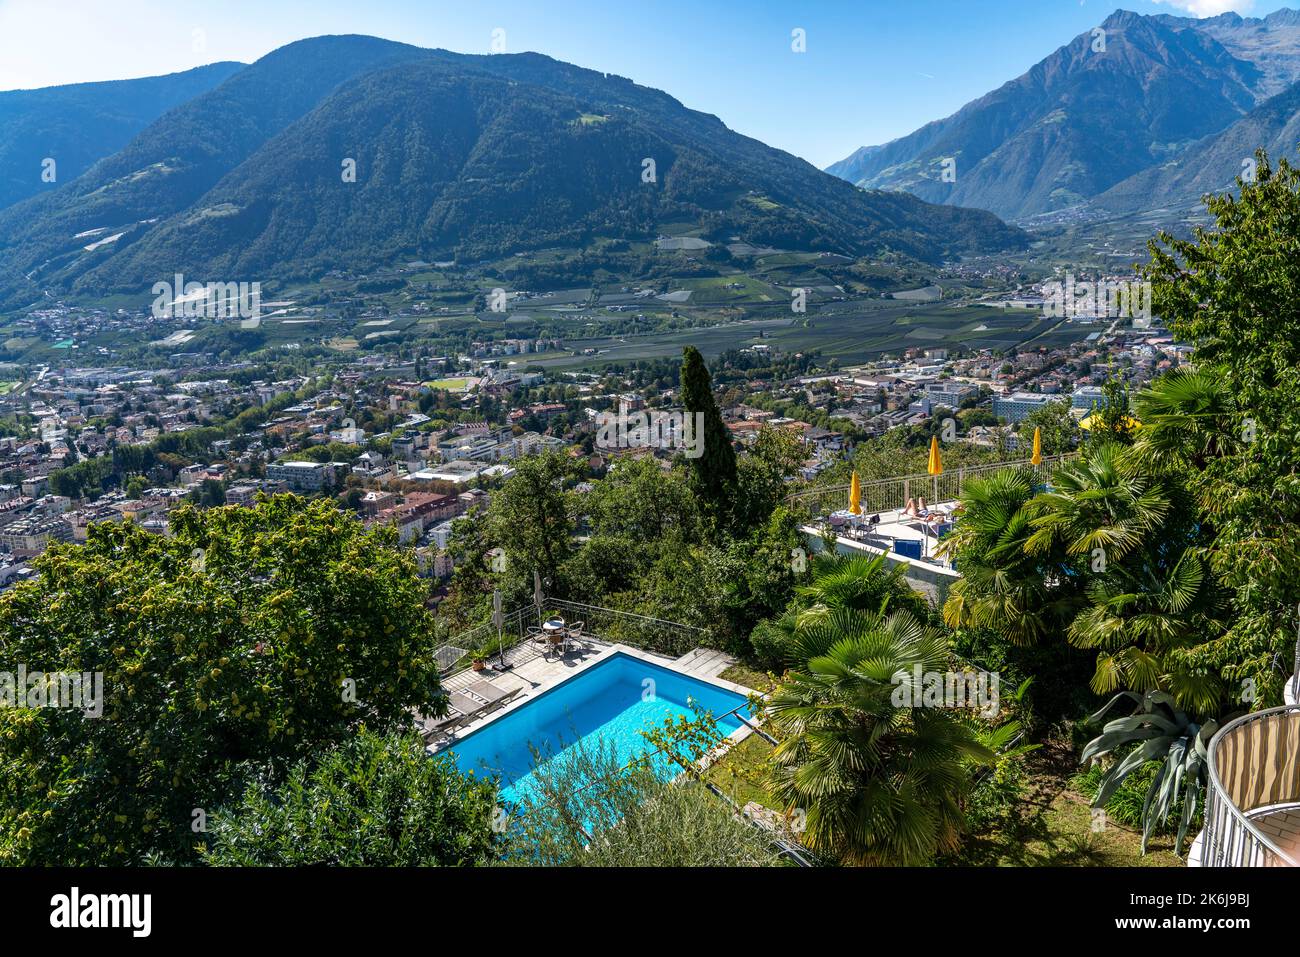 View of Merano from the top station of the chairlift to Dorf Tirol, Hotel Pool, South Tyrol, Italy Stock Photo